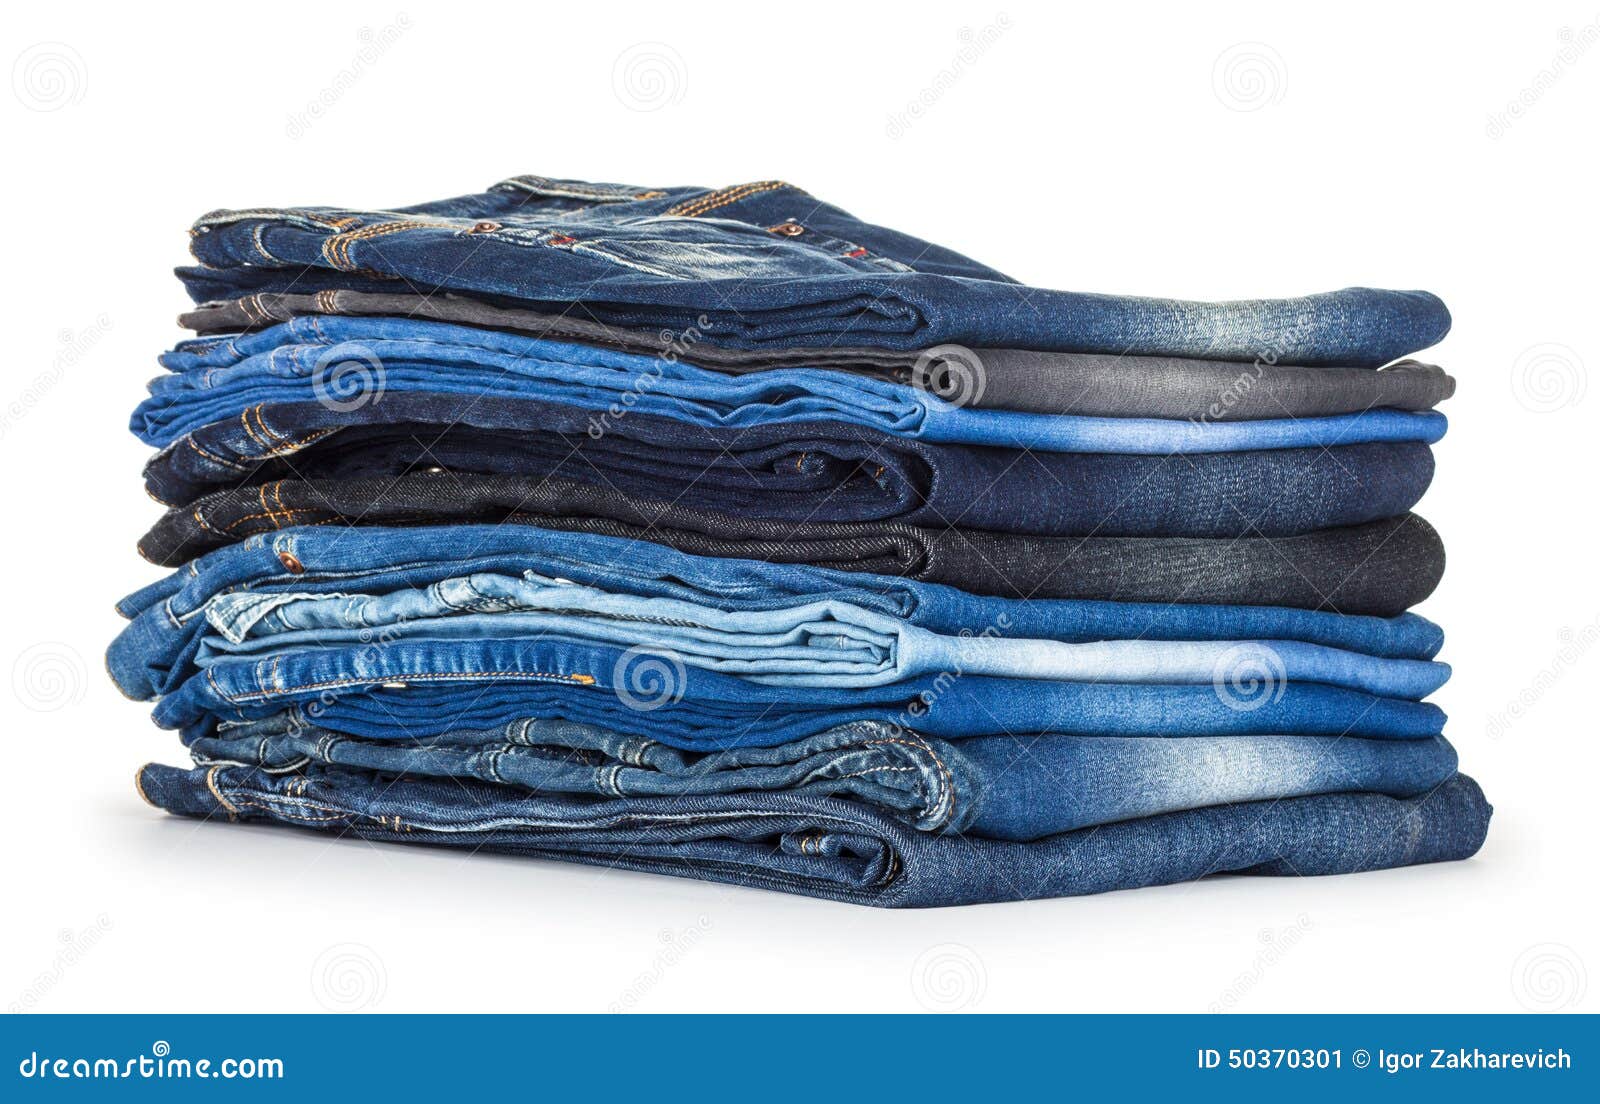 Stack Of Different Shades Of Blue Jeans Stock Photo - Image: 50370301